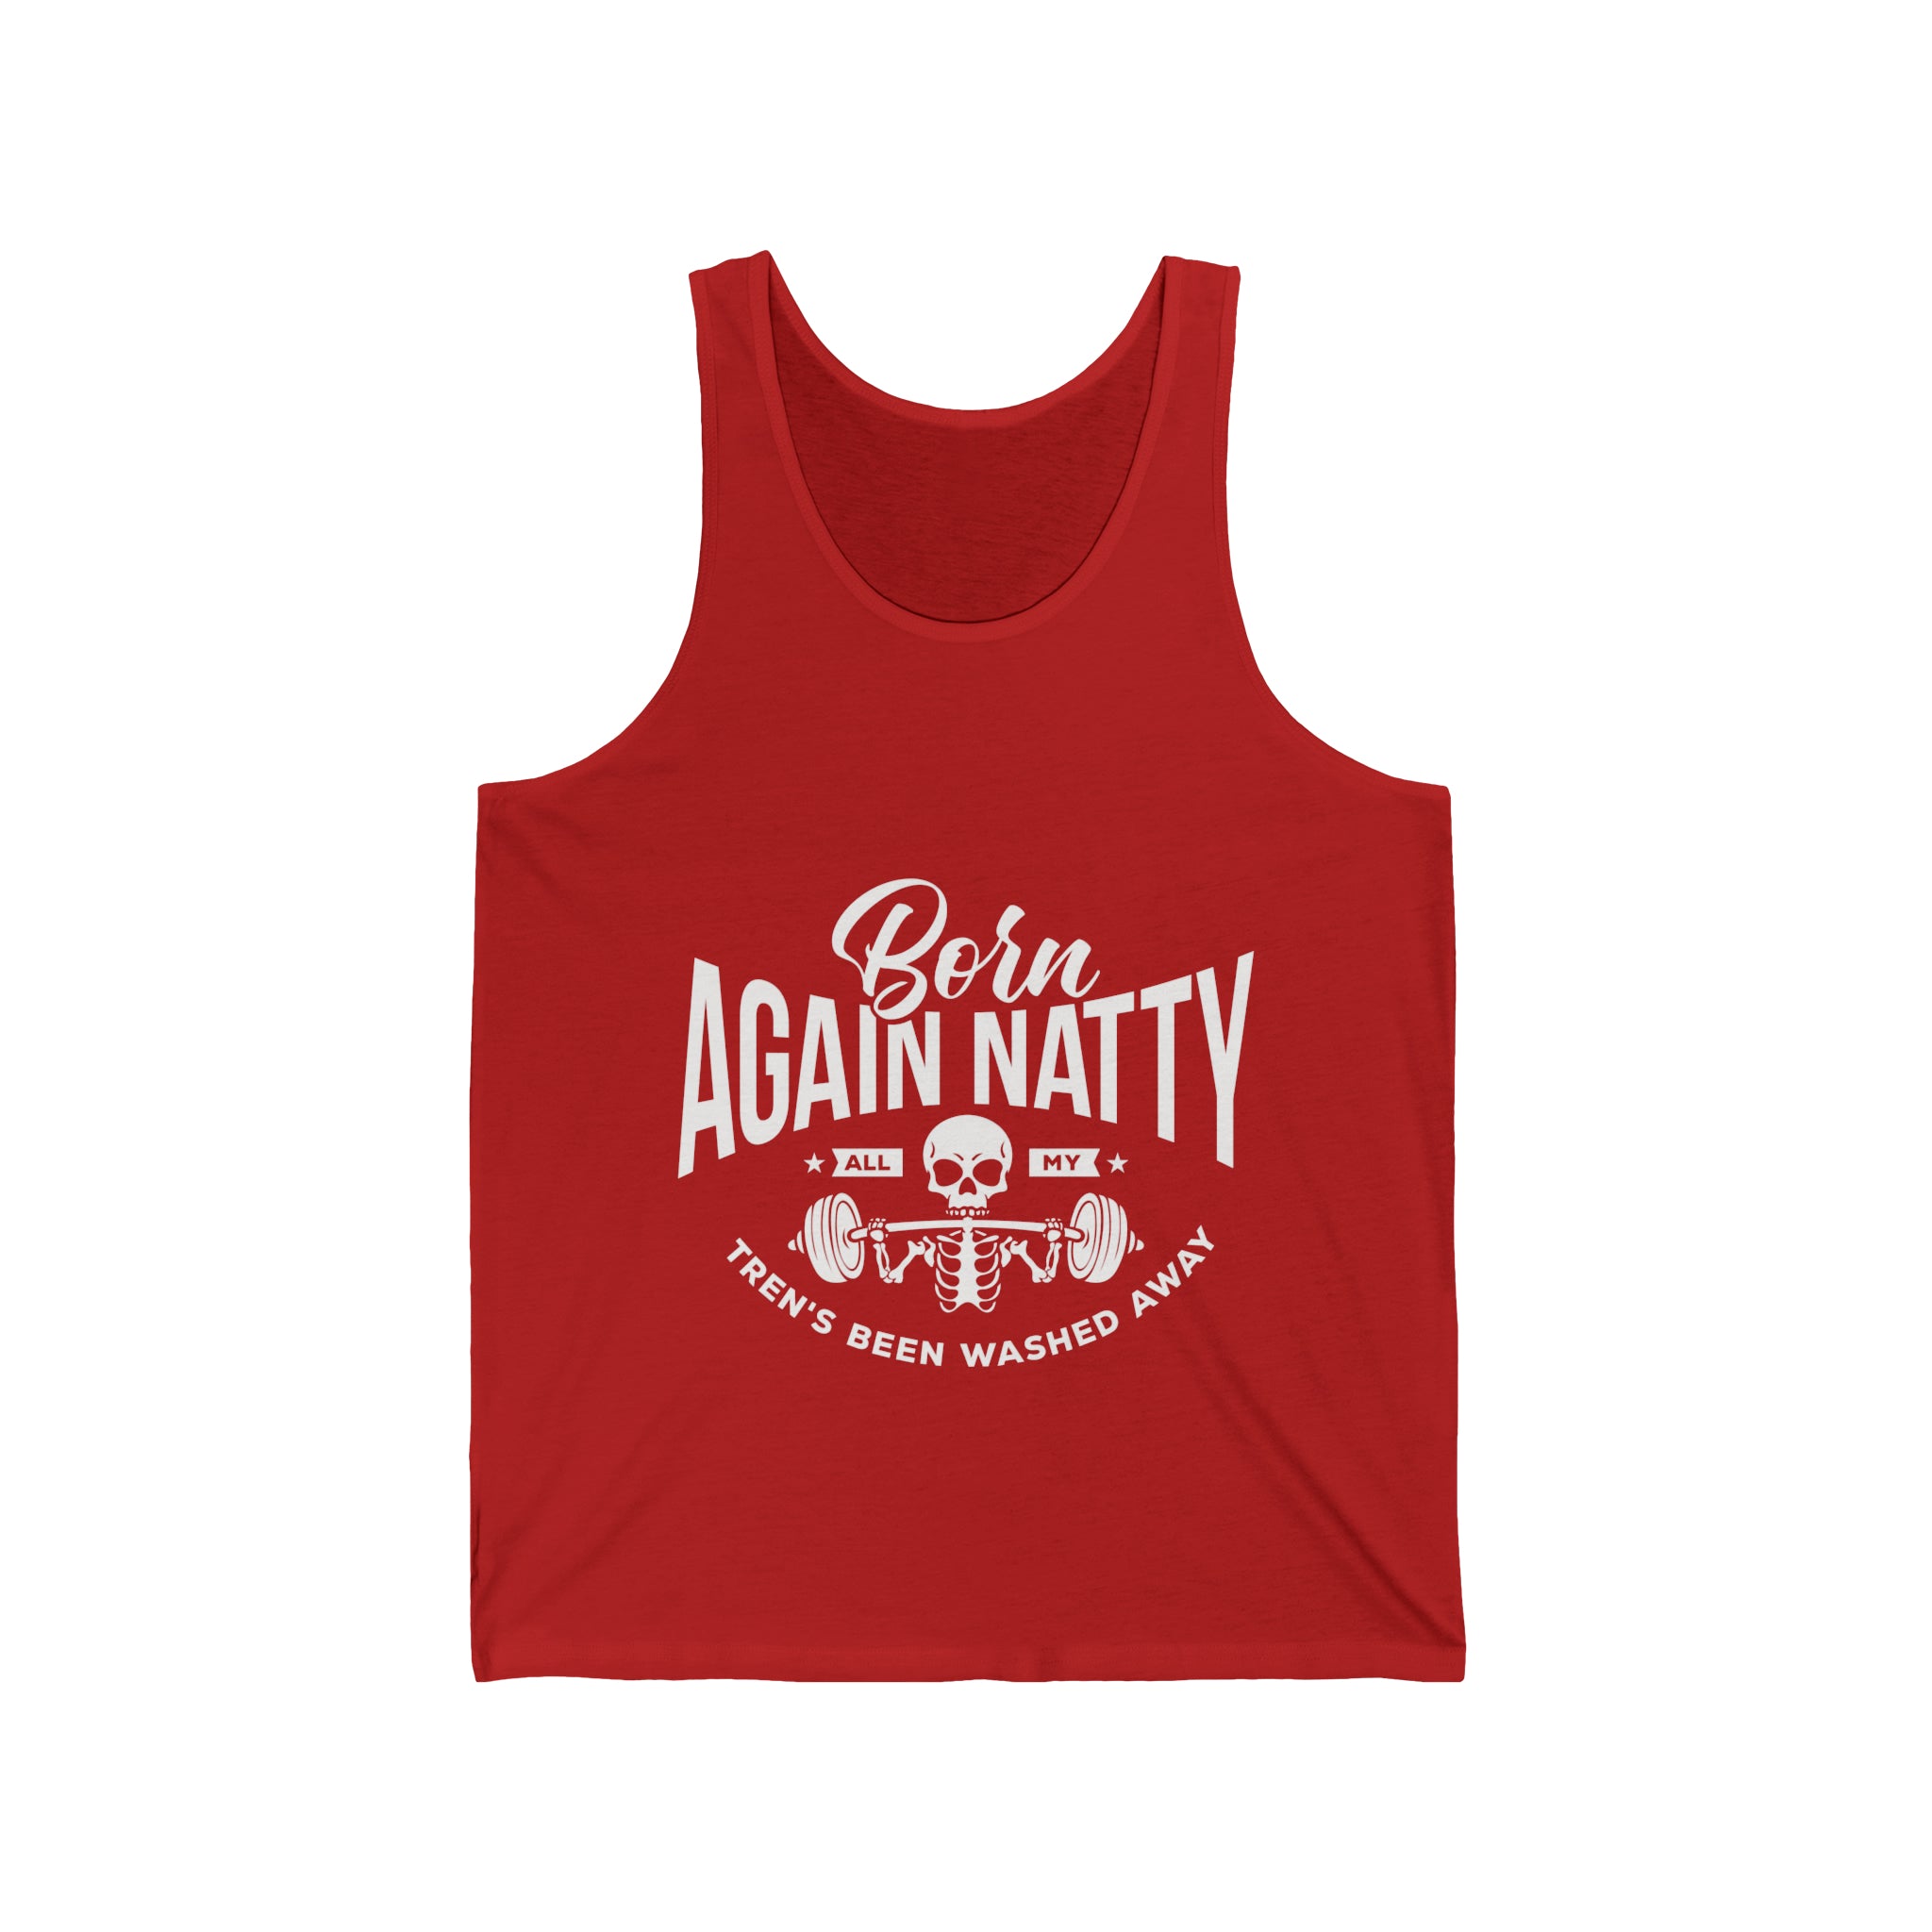 Born Again Natty - All My Tren's Been Washed Away  Unisex Jersey Tank